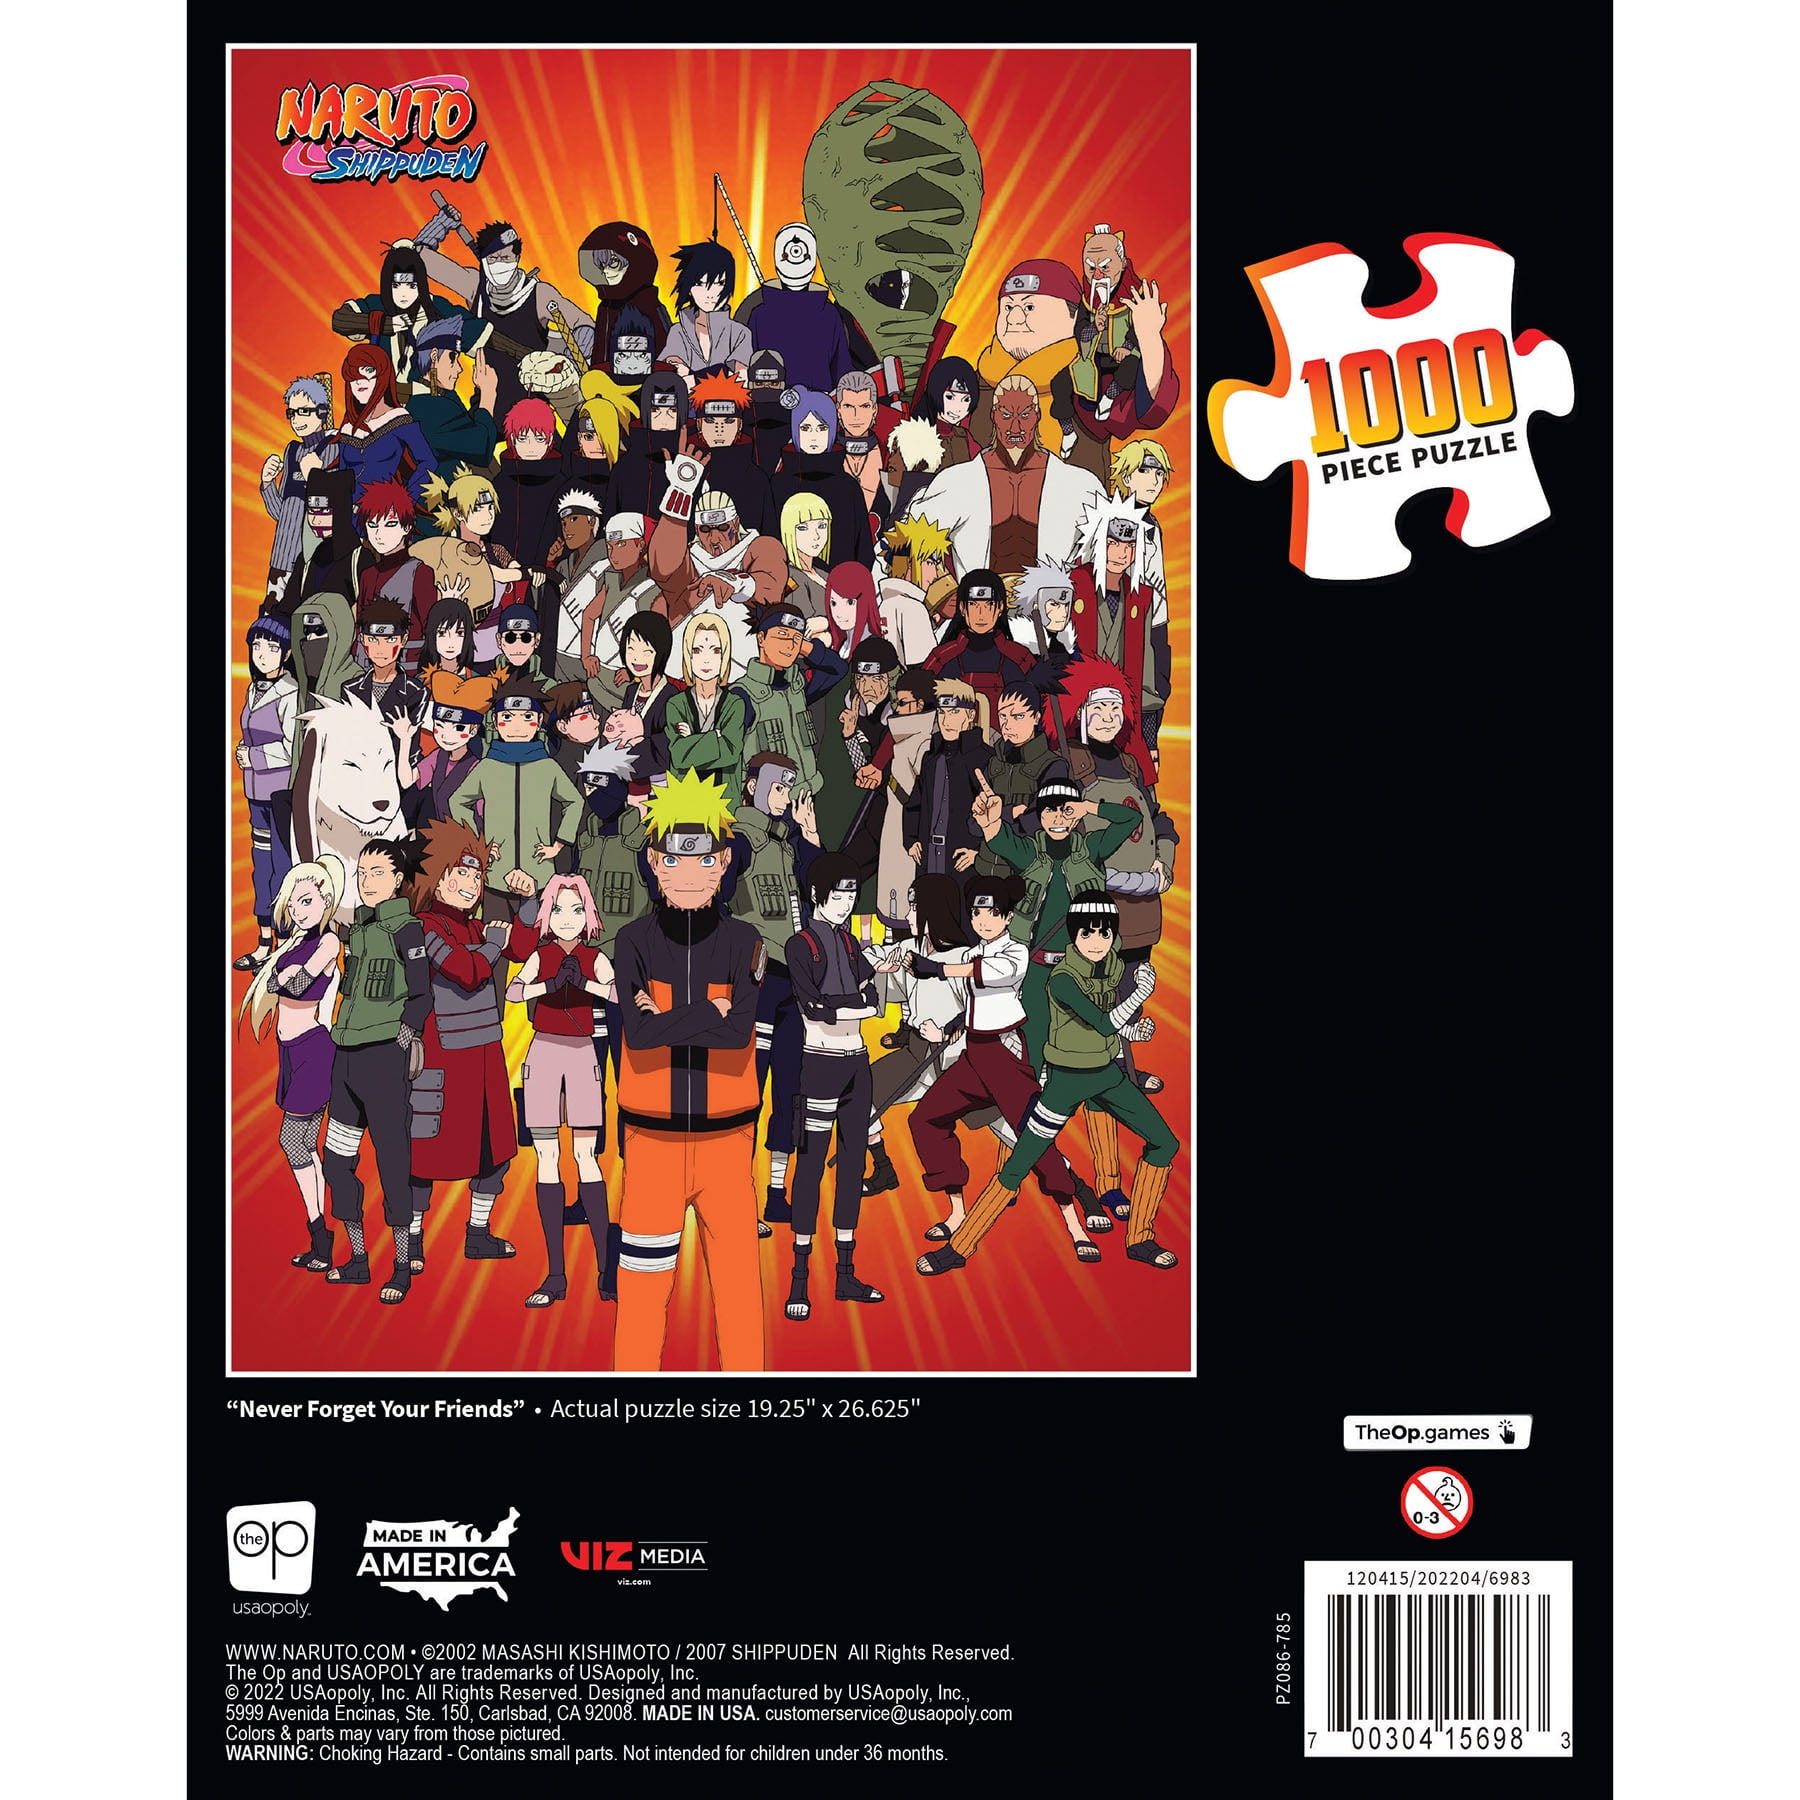 USAOPOLY Naruto Ramen Time 1000 Piece Jigsaw Puzzle | Officially Licensed  Naruto Merchandise | Collectible Puzzle Featuring Naruto Uzumaki from The